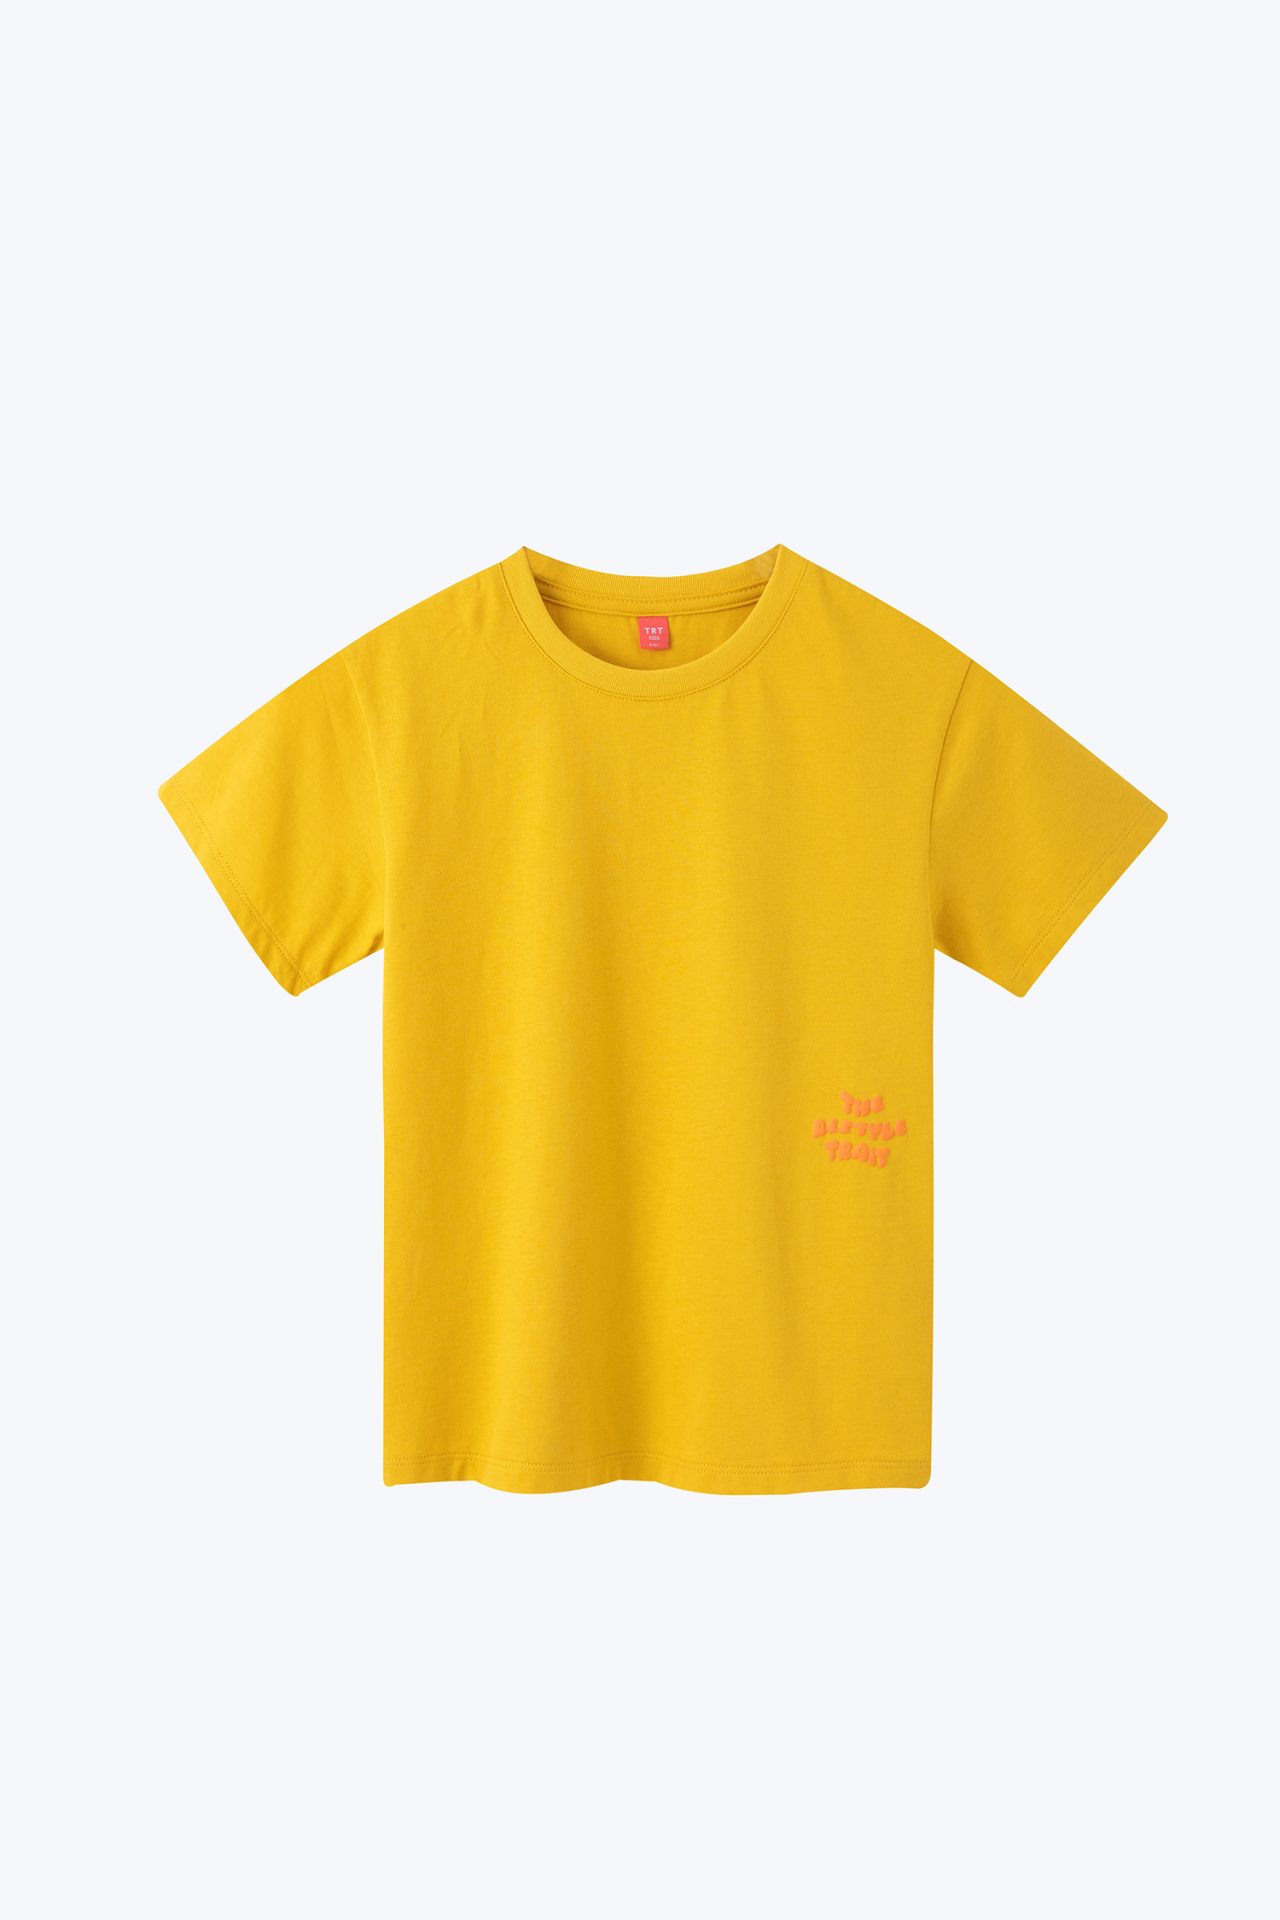 KT800010D Emotions Tee Cheeky YELLOW